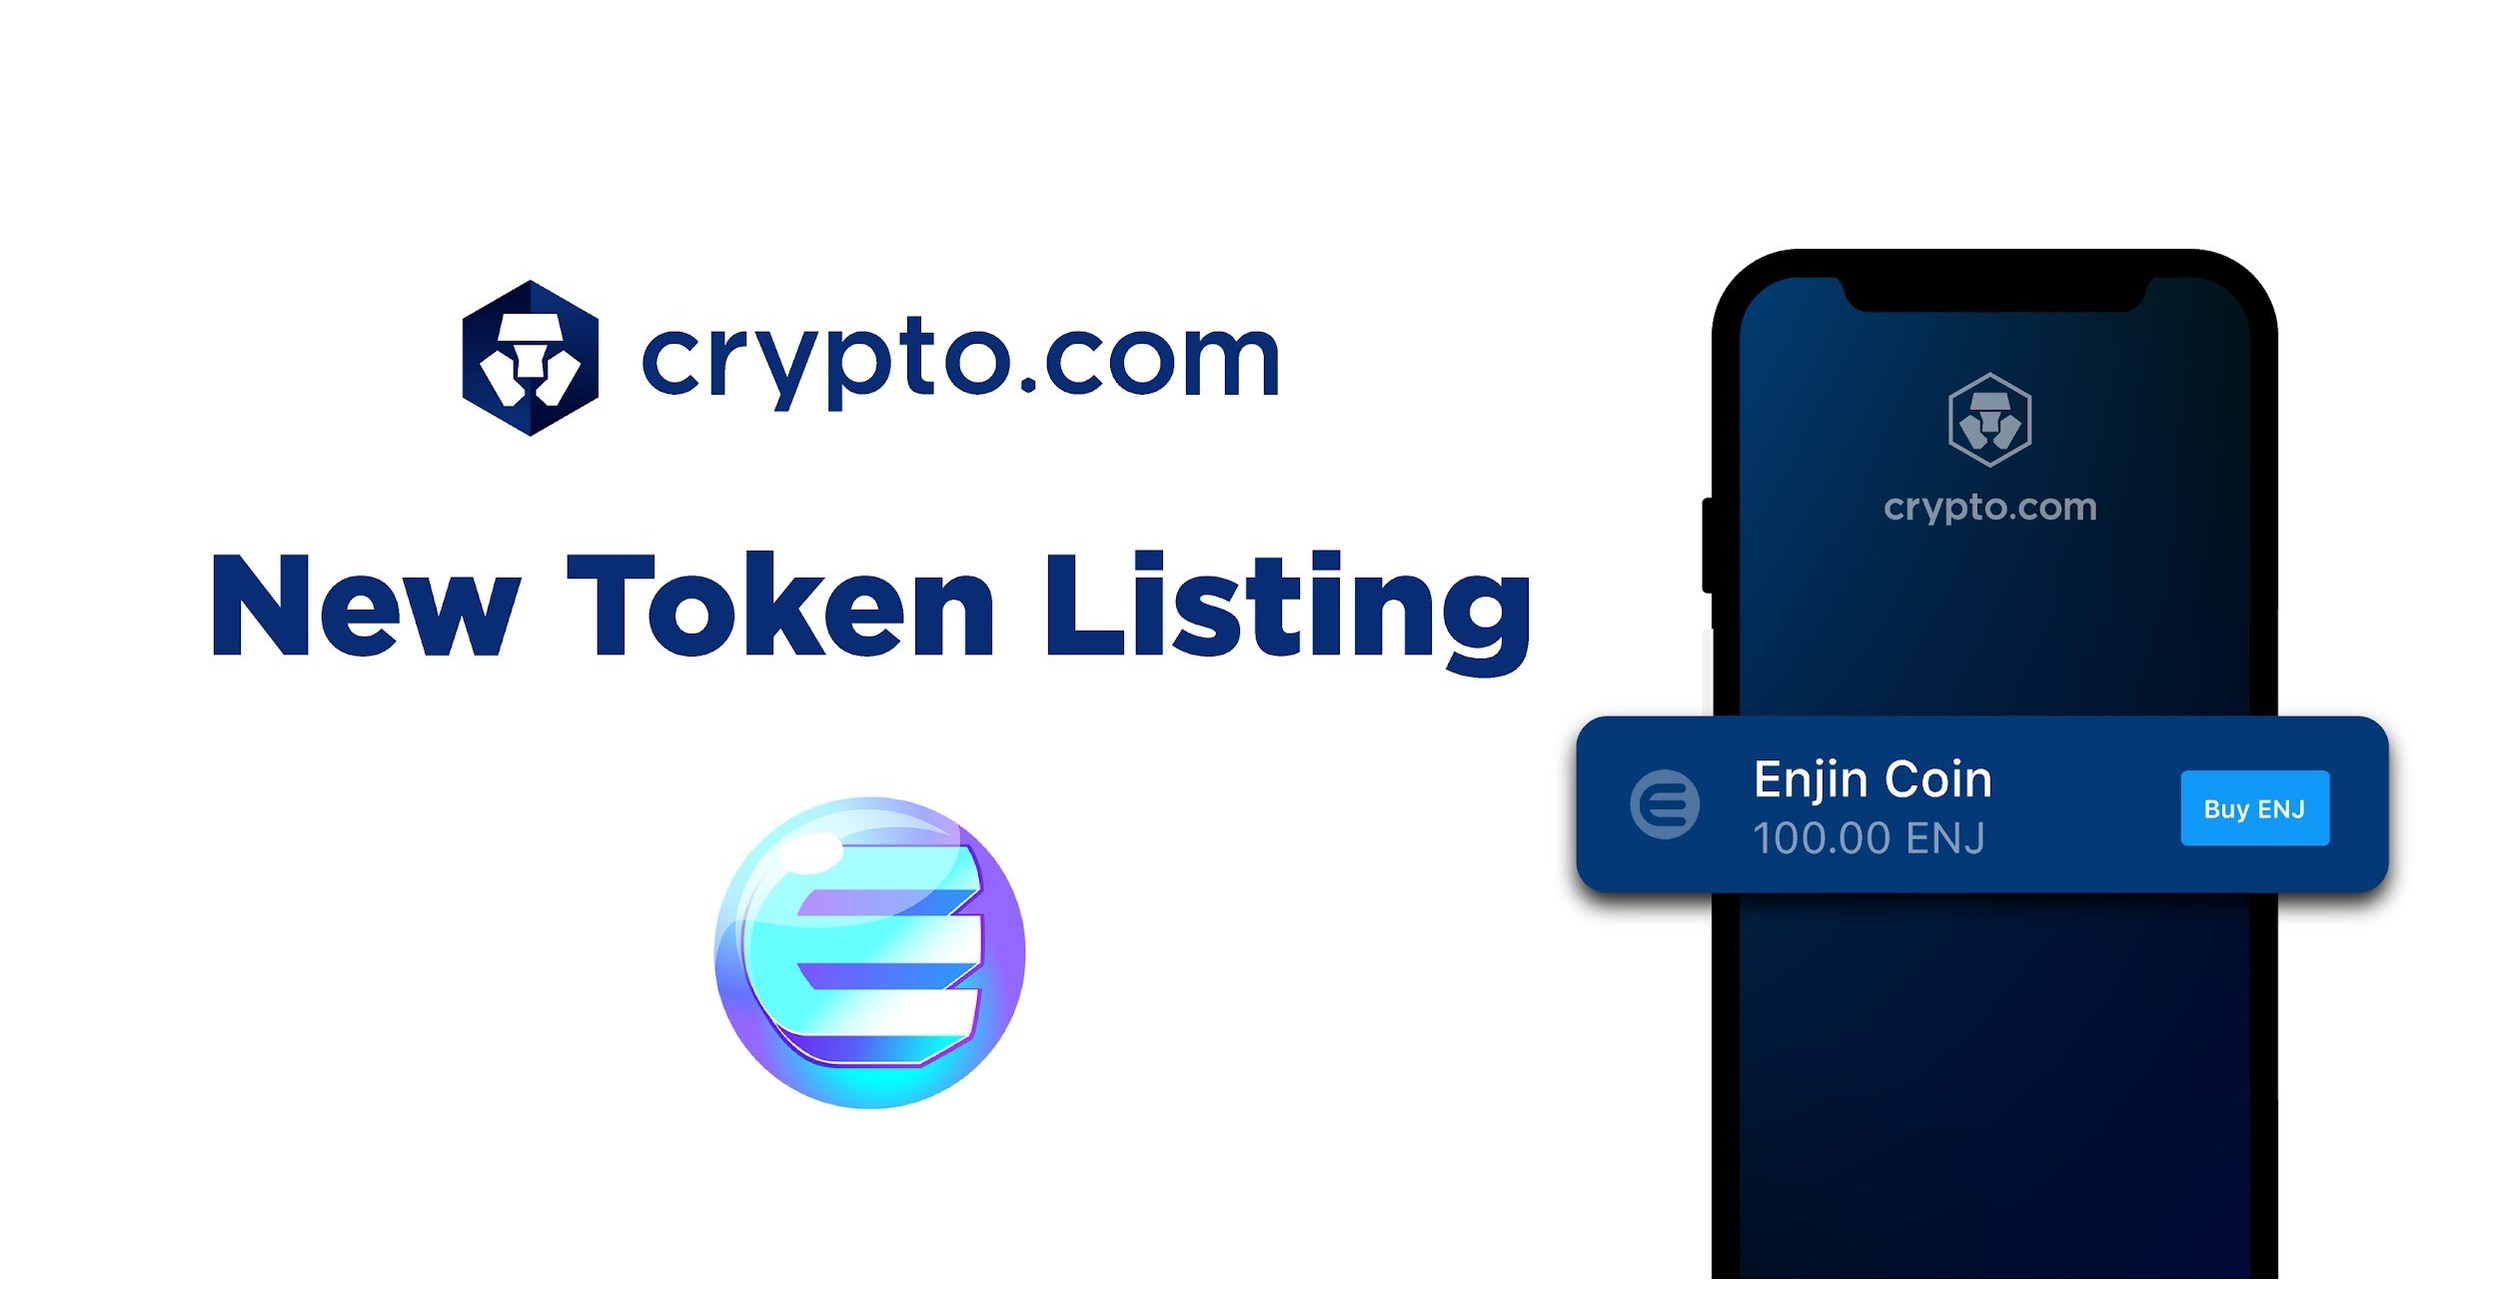 Crypto.com Lists ENJ and Welcomes Enjin Coin's 20 Million Users